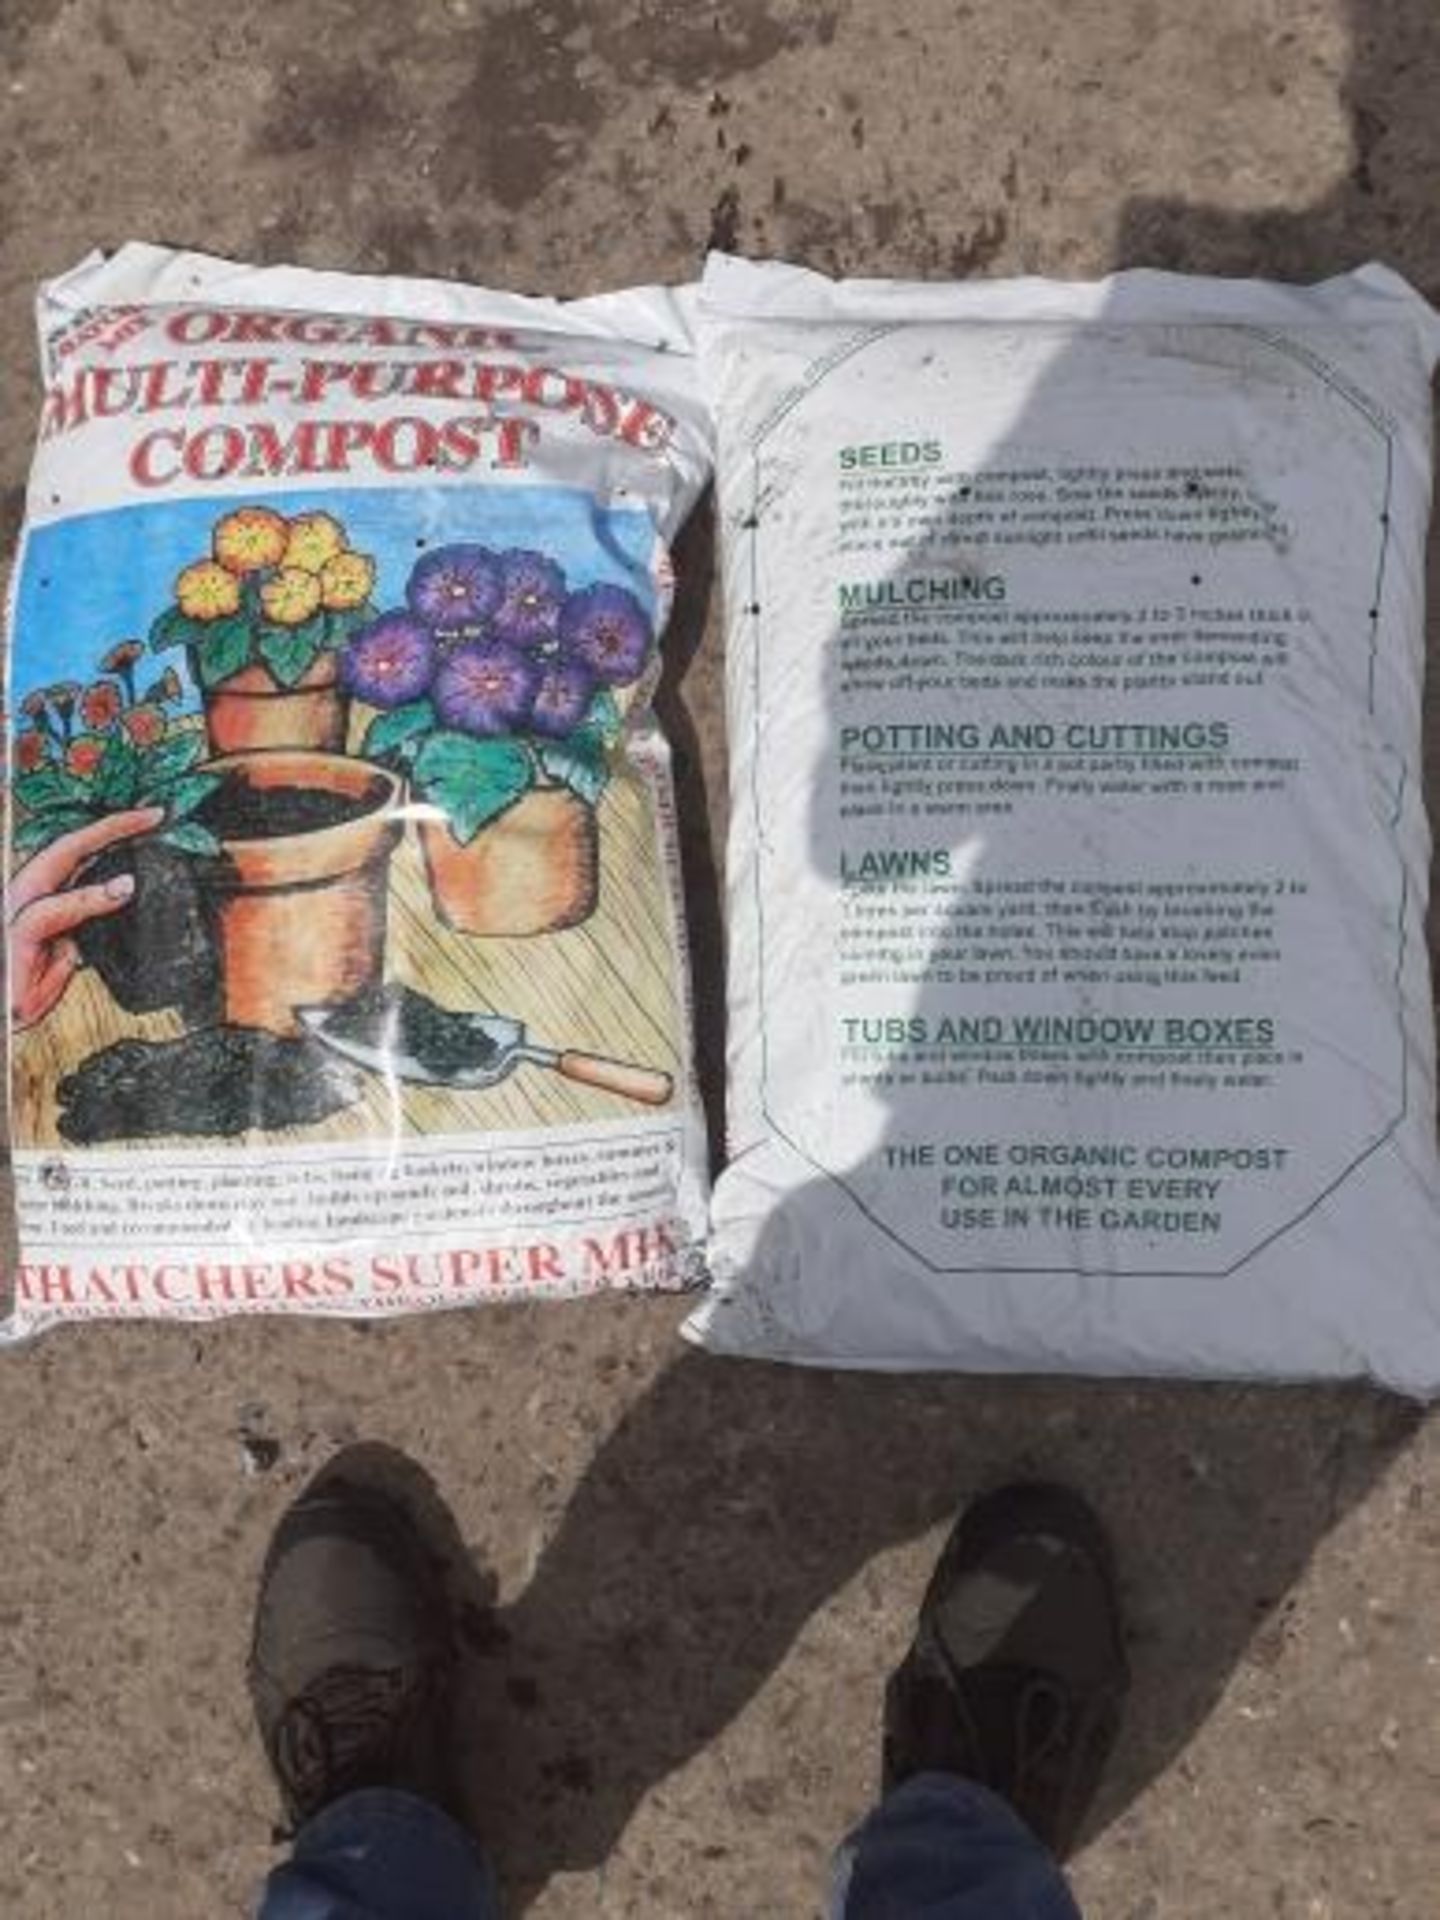 1 PALLET OF TOP GRADE COMPOST, EACH BAG CONTAINS 40 LITRES, 75 BAGS PER PALLET, APPROX WEIGHT 800kg - Image 2 of 5